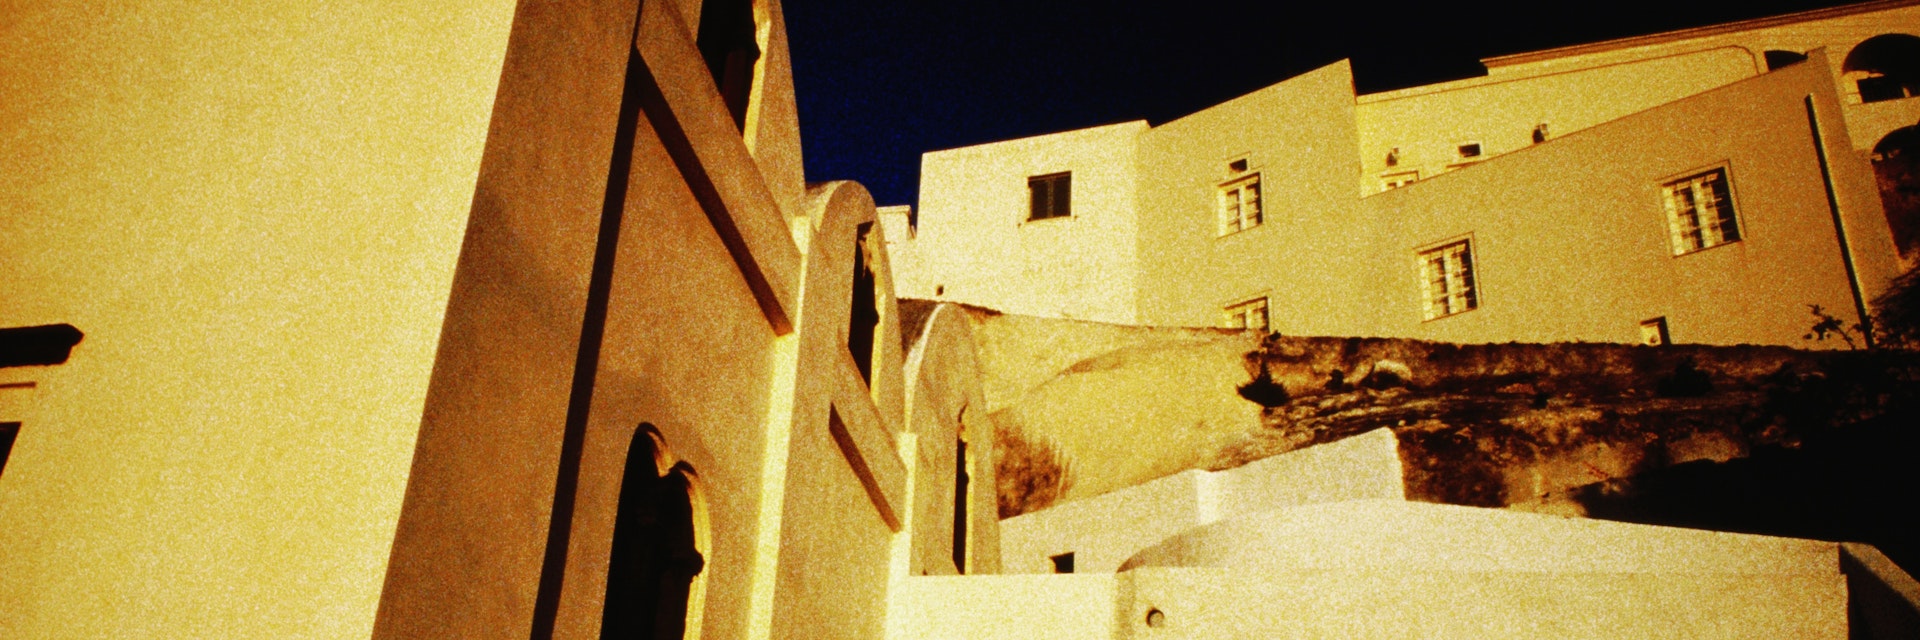 Whitewashed houses of Syros in the evening light.